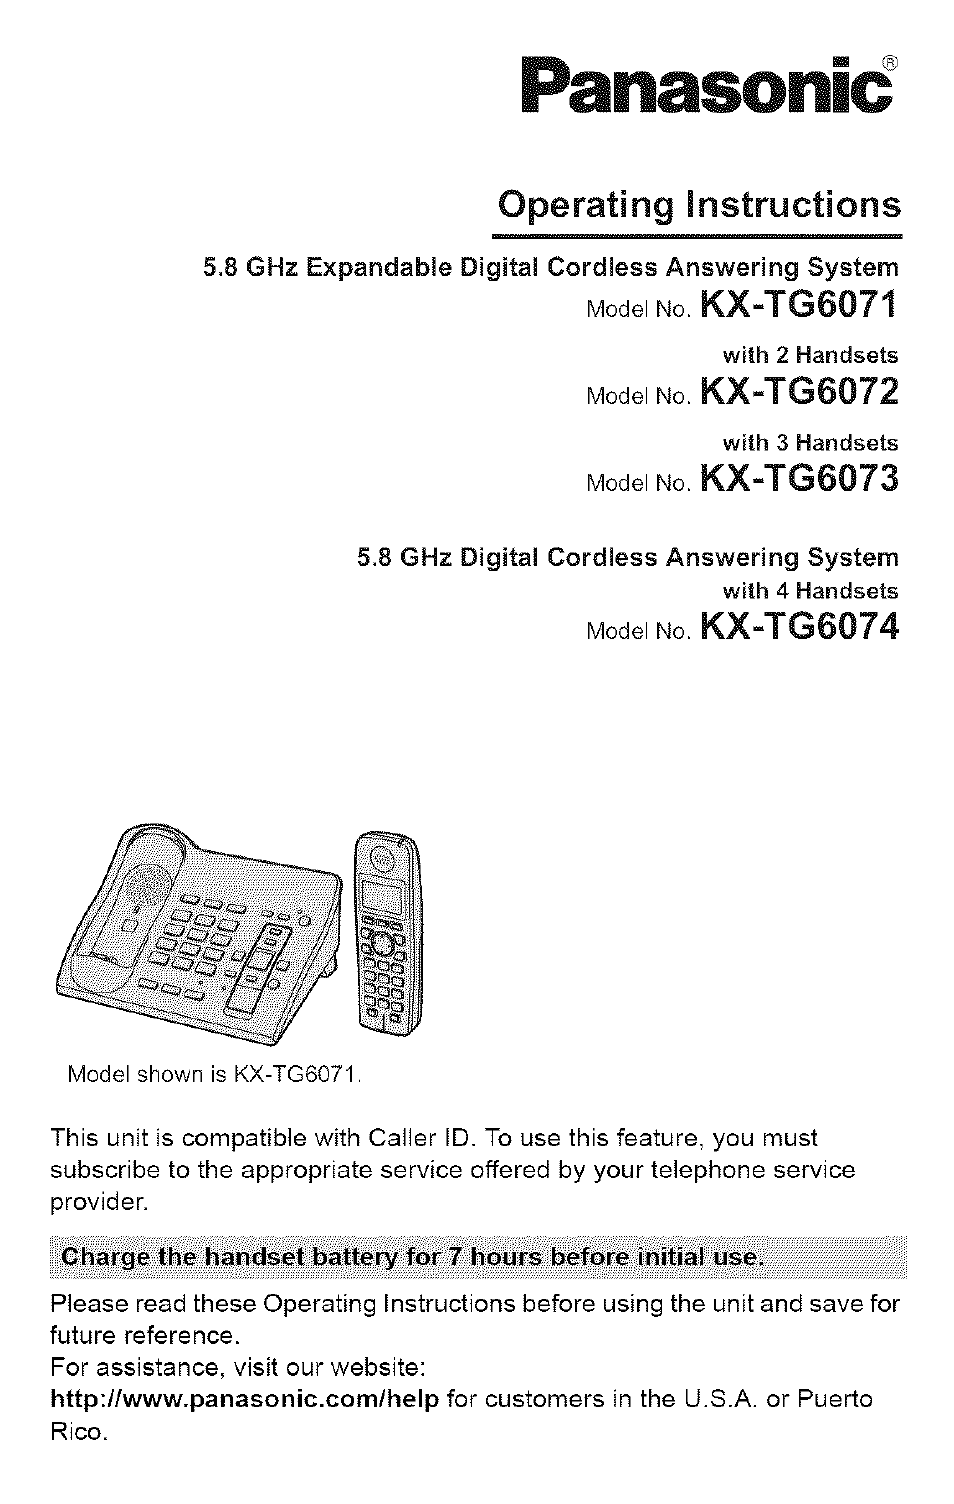 Panasonic 5.8 GHZ EXPANDABLE DIGITAL CORDLESS ANSWERING SYSTEM KX-TG6074 User Manual | 56 pages